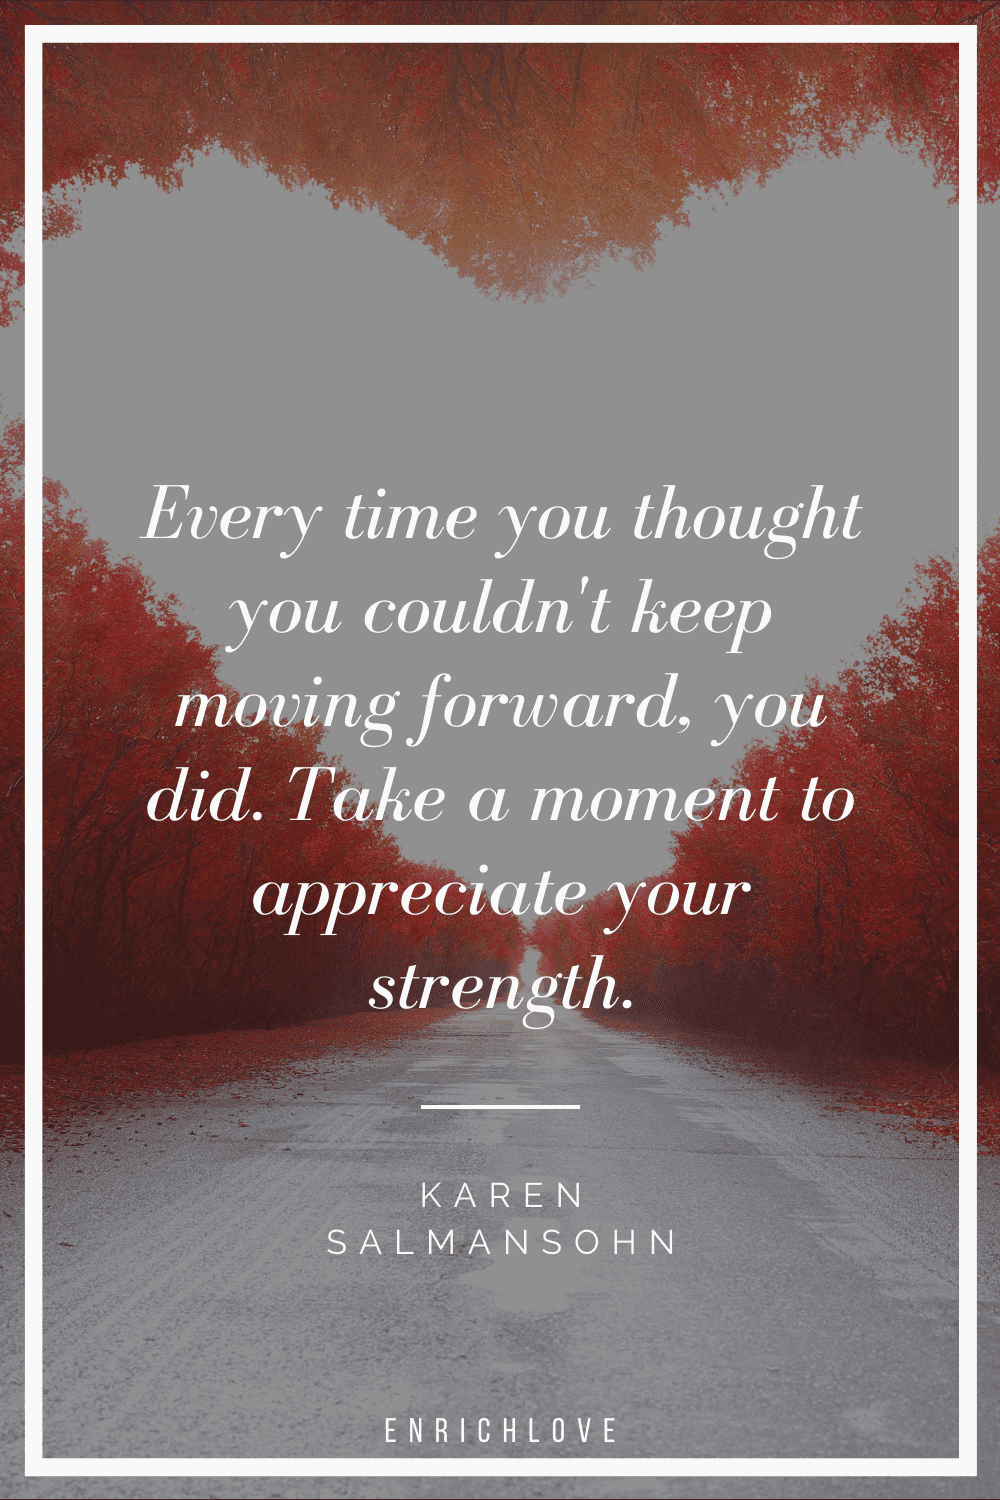 Every time you thought you couldn't keep moving forward, you did. Take a moment to appreciate your strength.